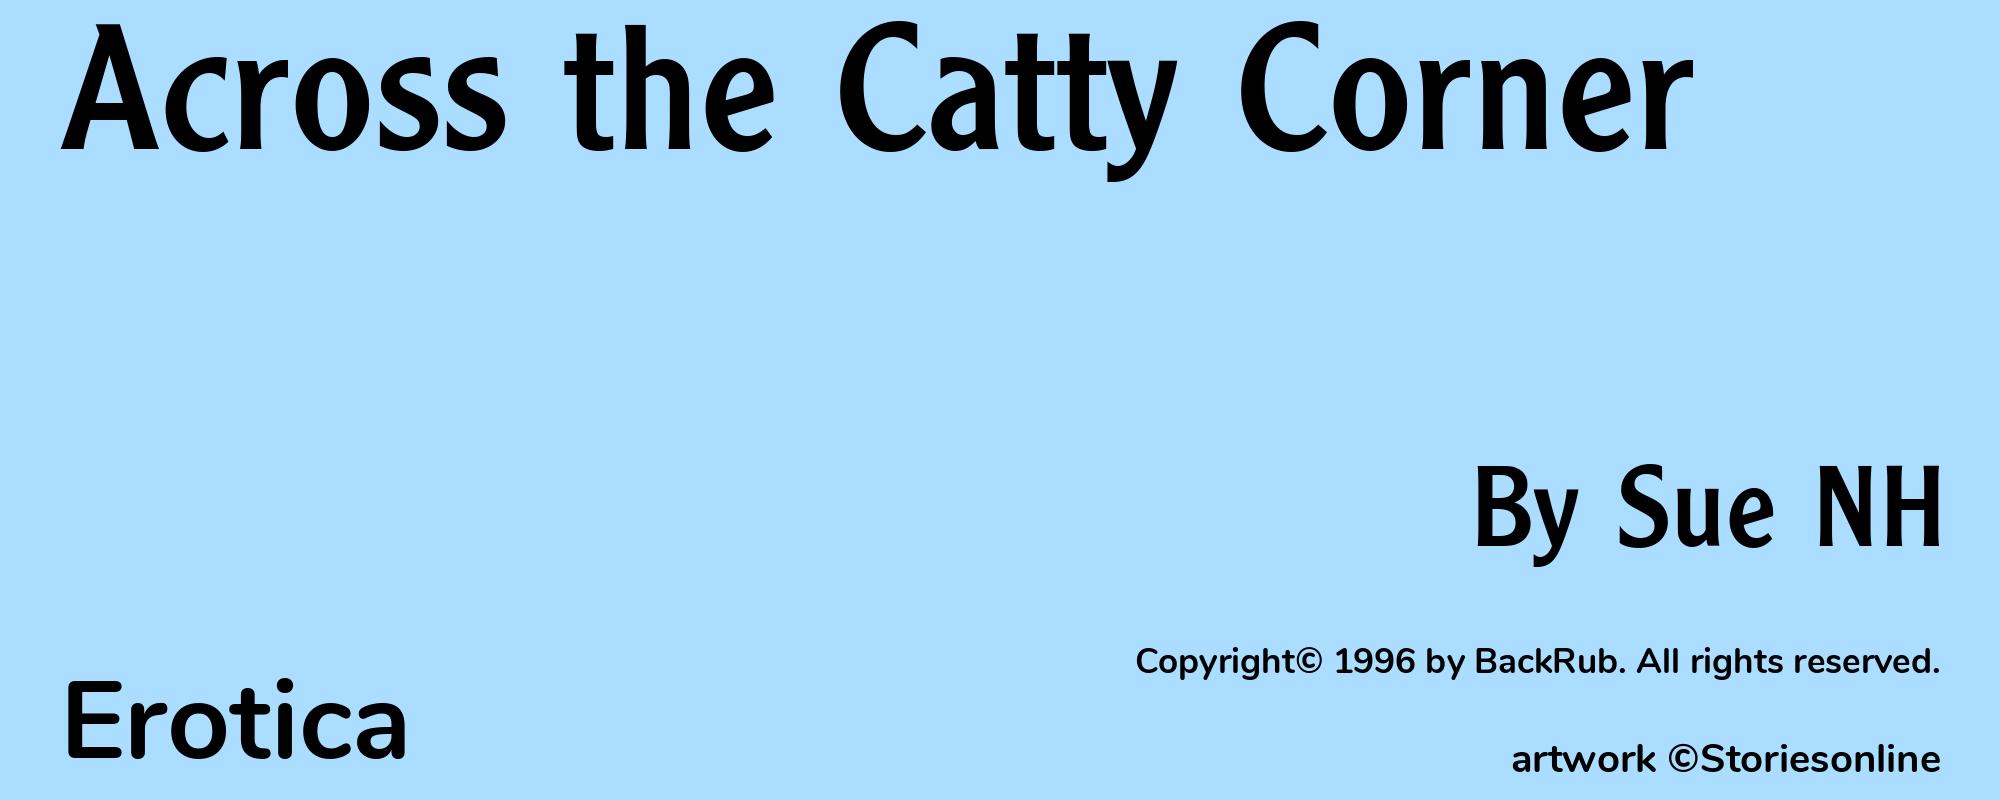 Across the Catty Corner - Cover